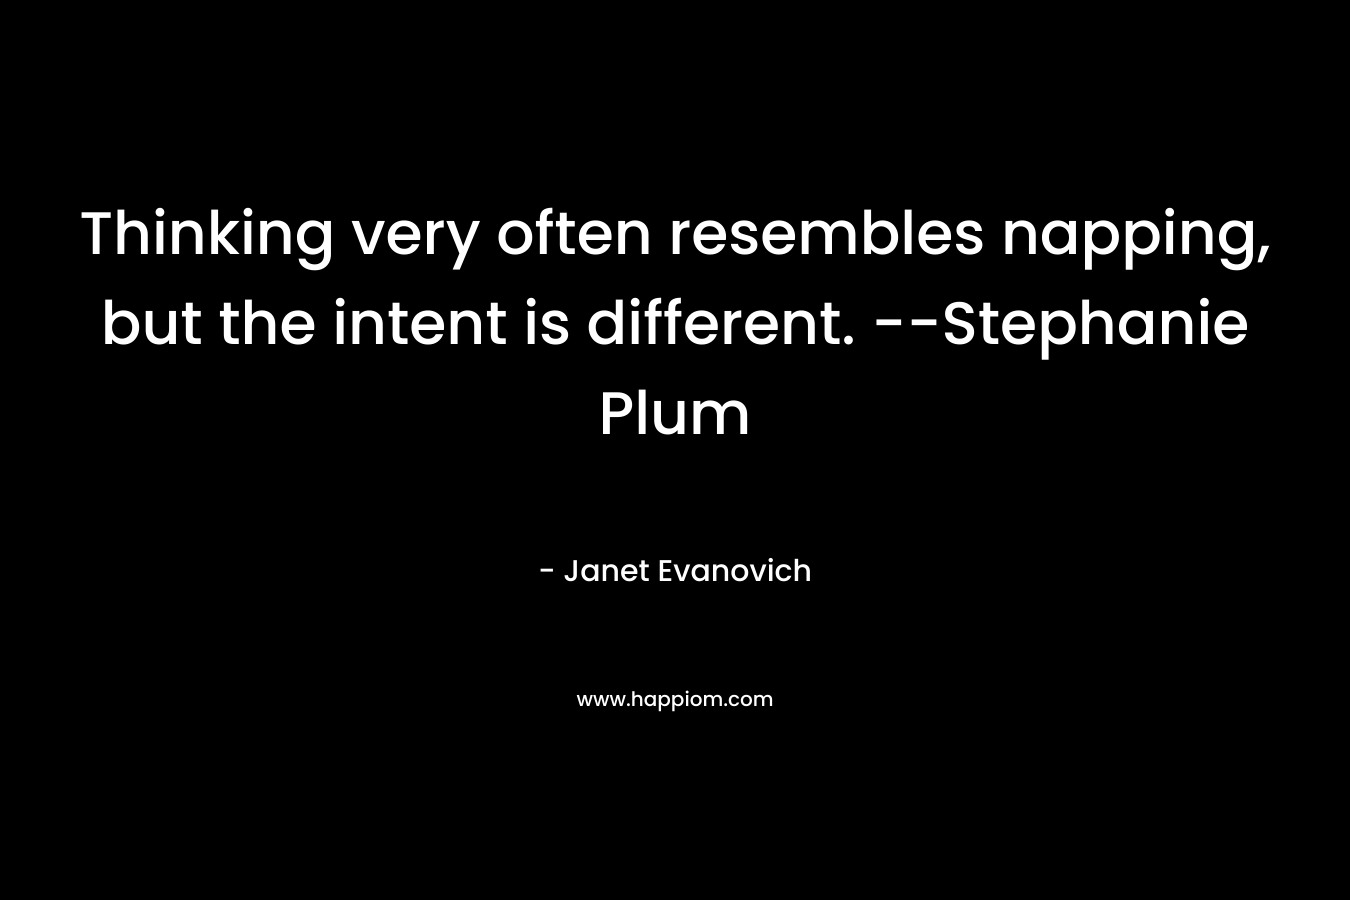 Thinking very often resembles napping, but the intent is different. --Stephanie Plum